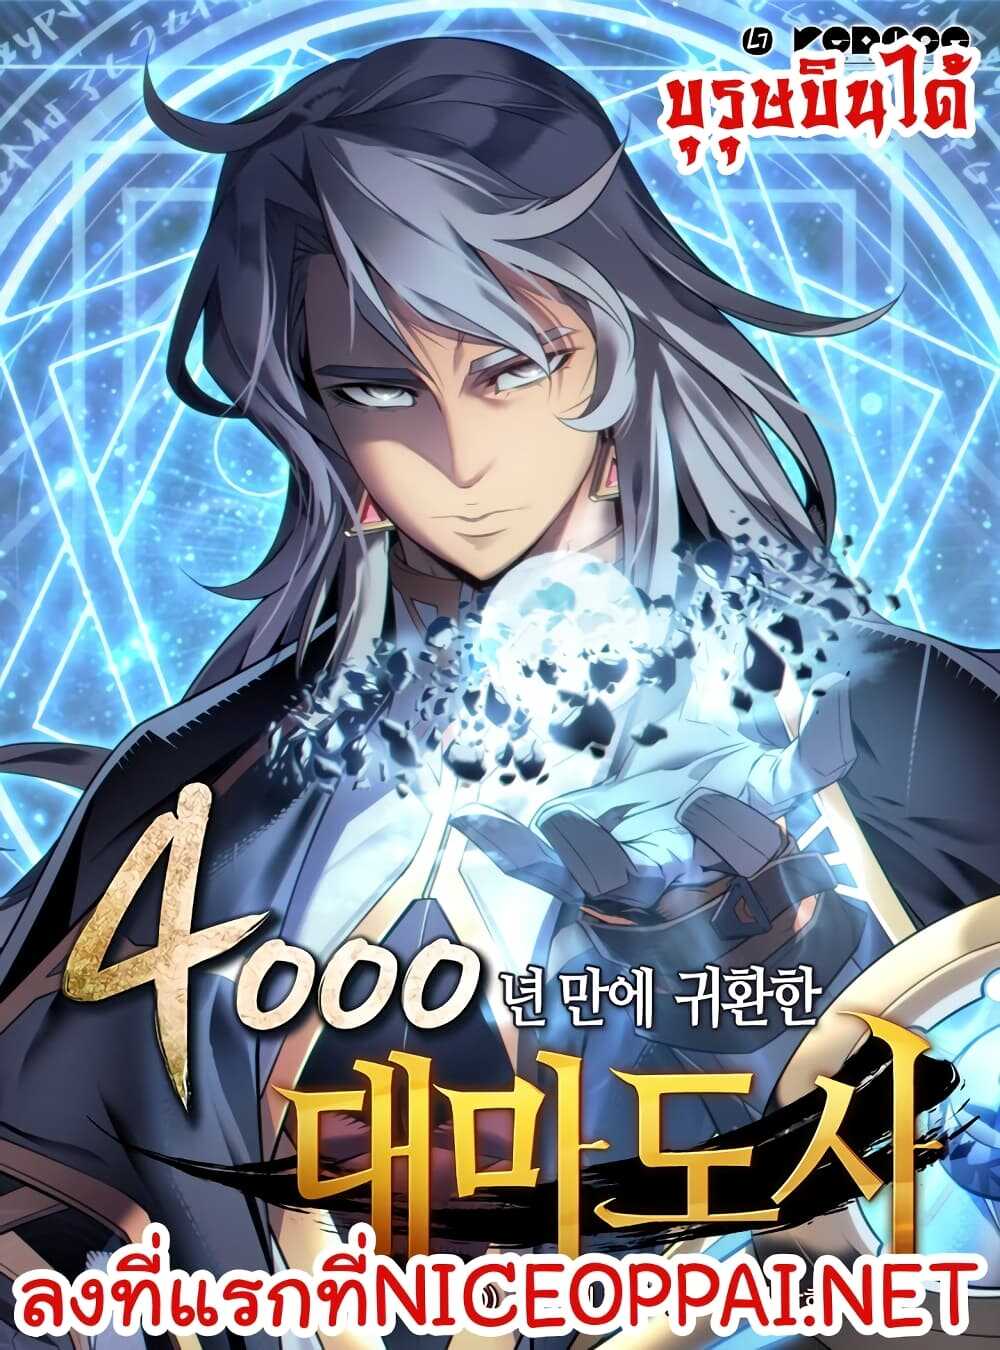 The Great Mage Returns After 4000 Years 22 (1)